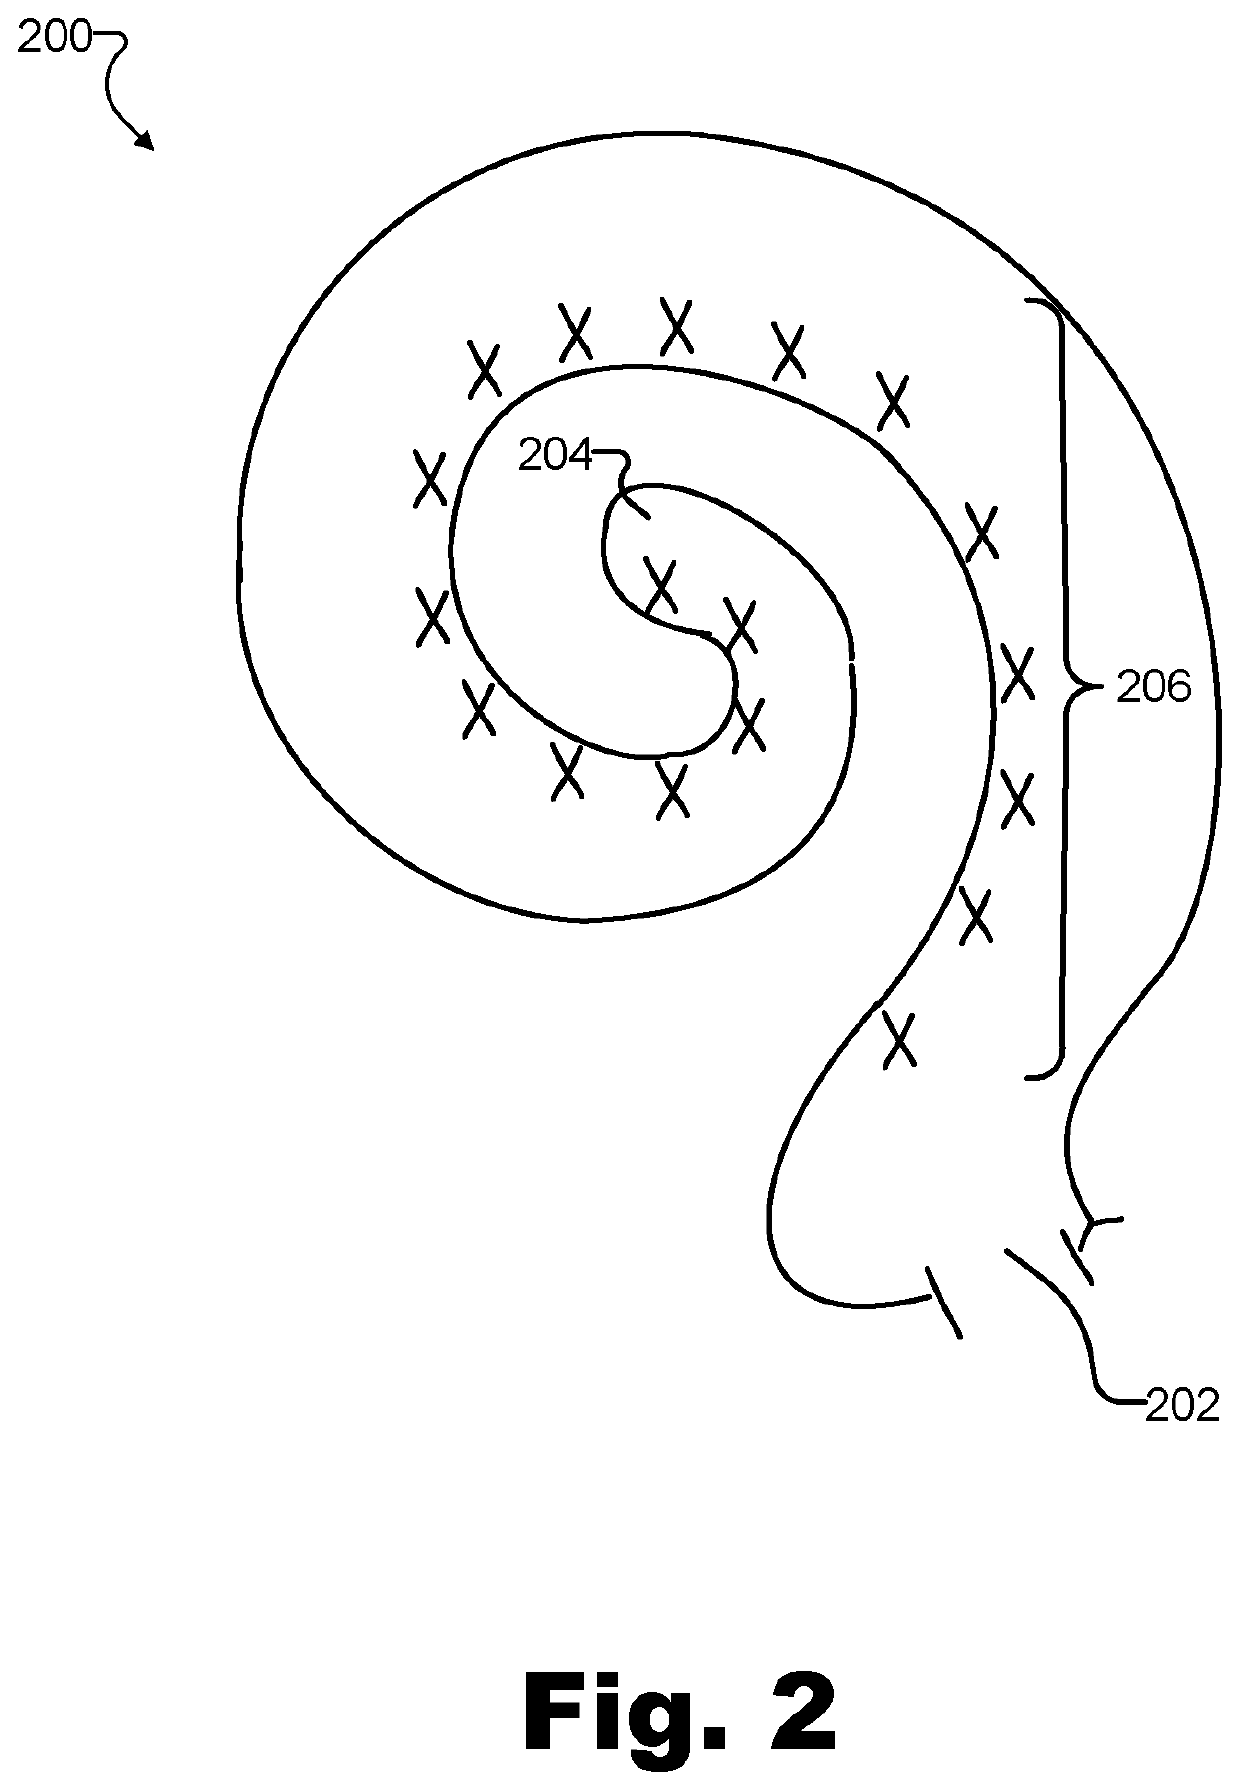 Apparatuses and methods for setting cochlear implant system stimulation parameters based on electrode impedance measurements